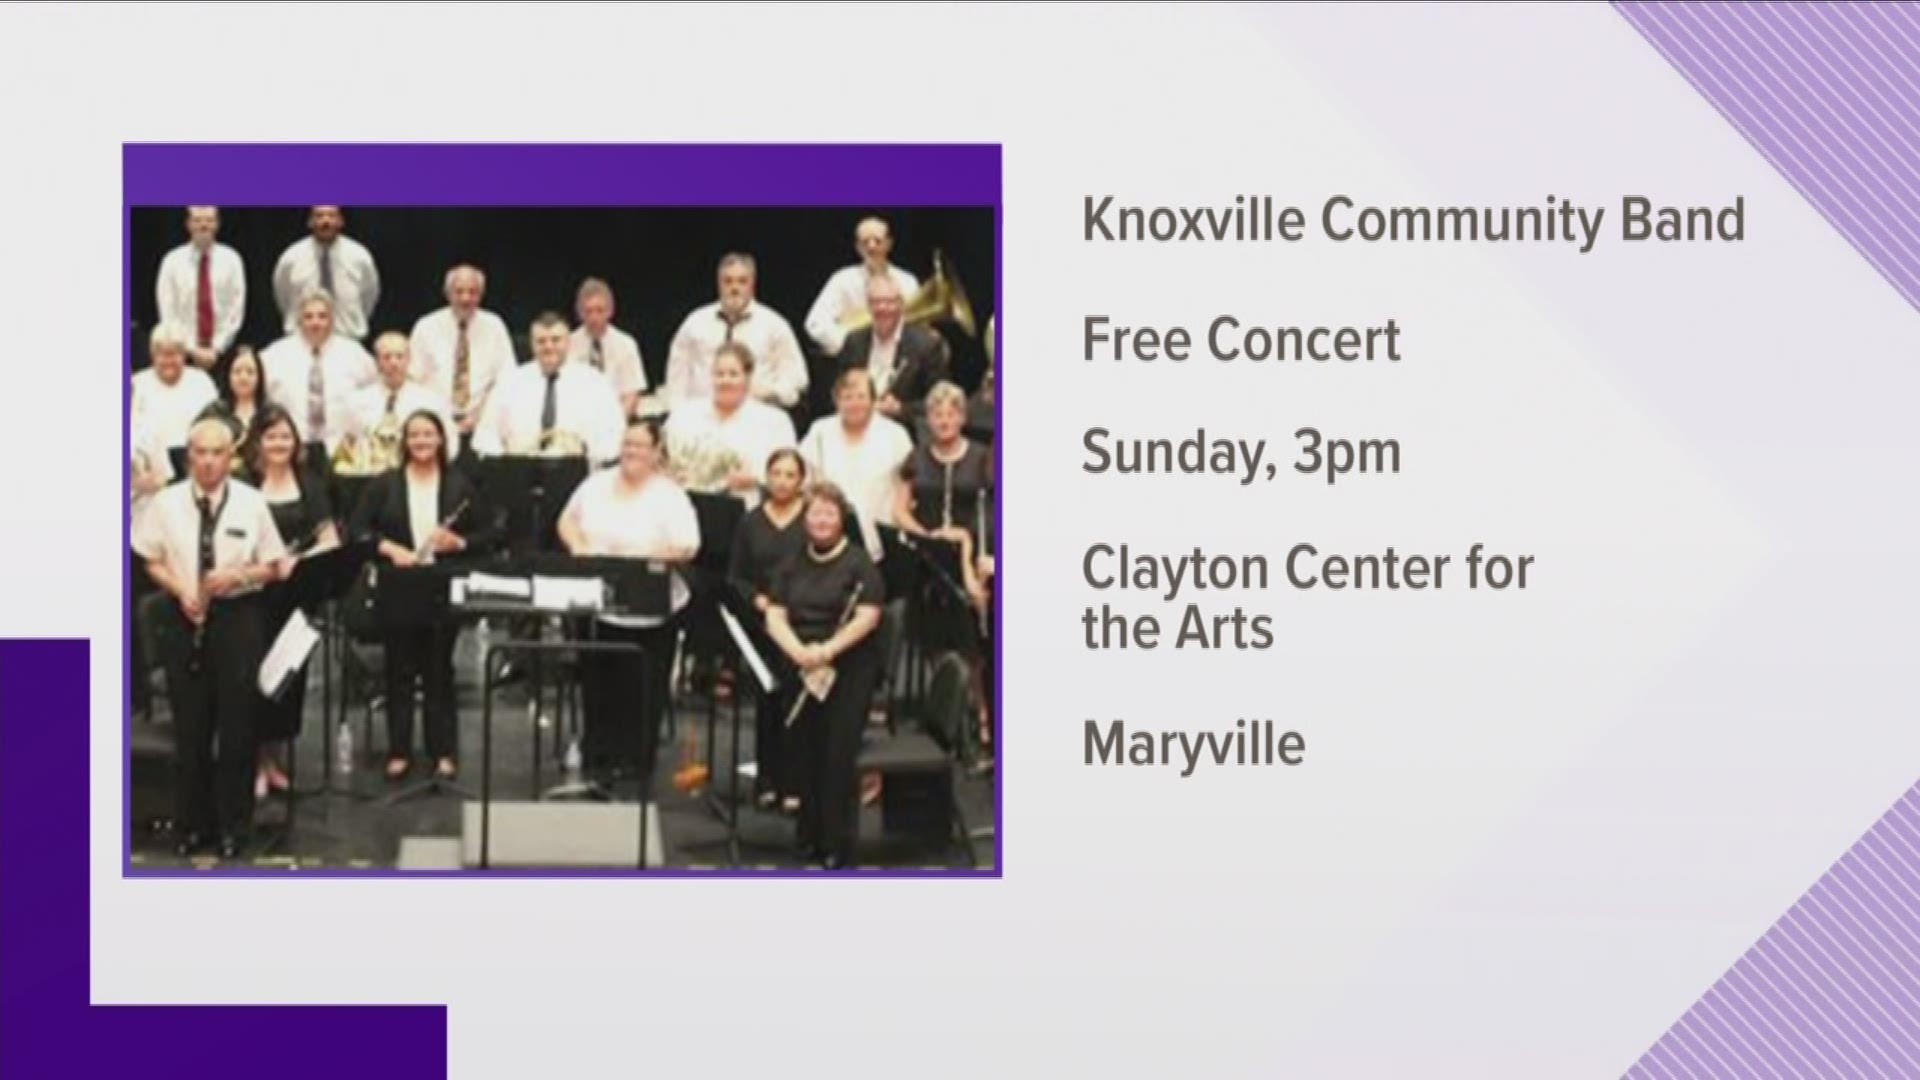 Maryville has an active and busy arts community.